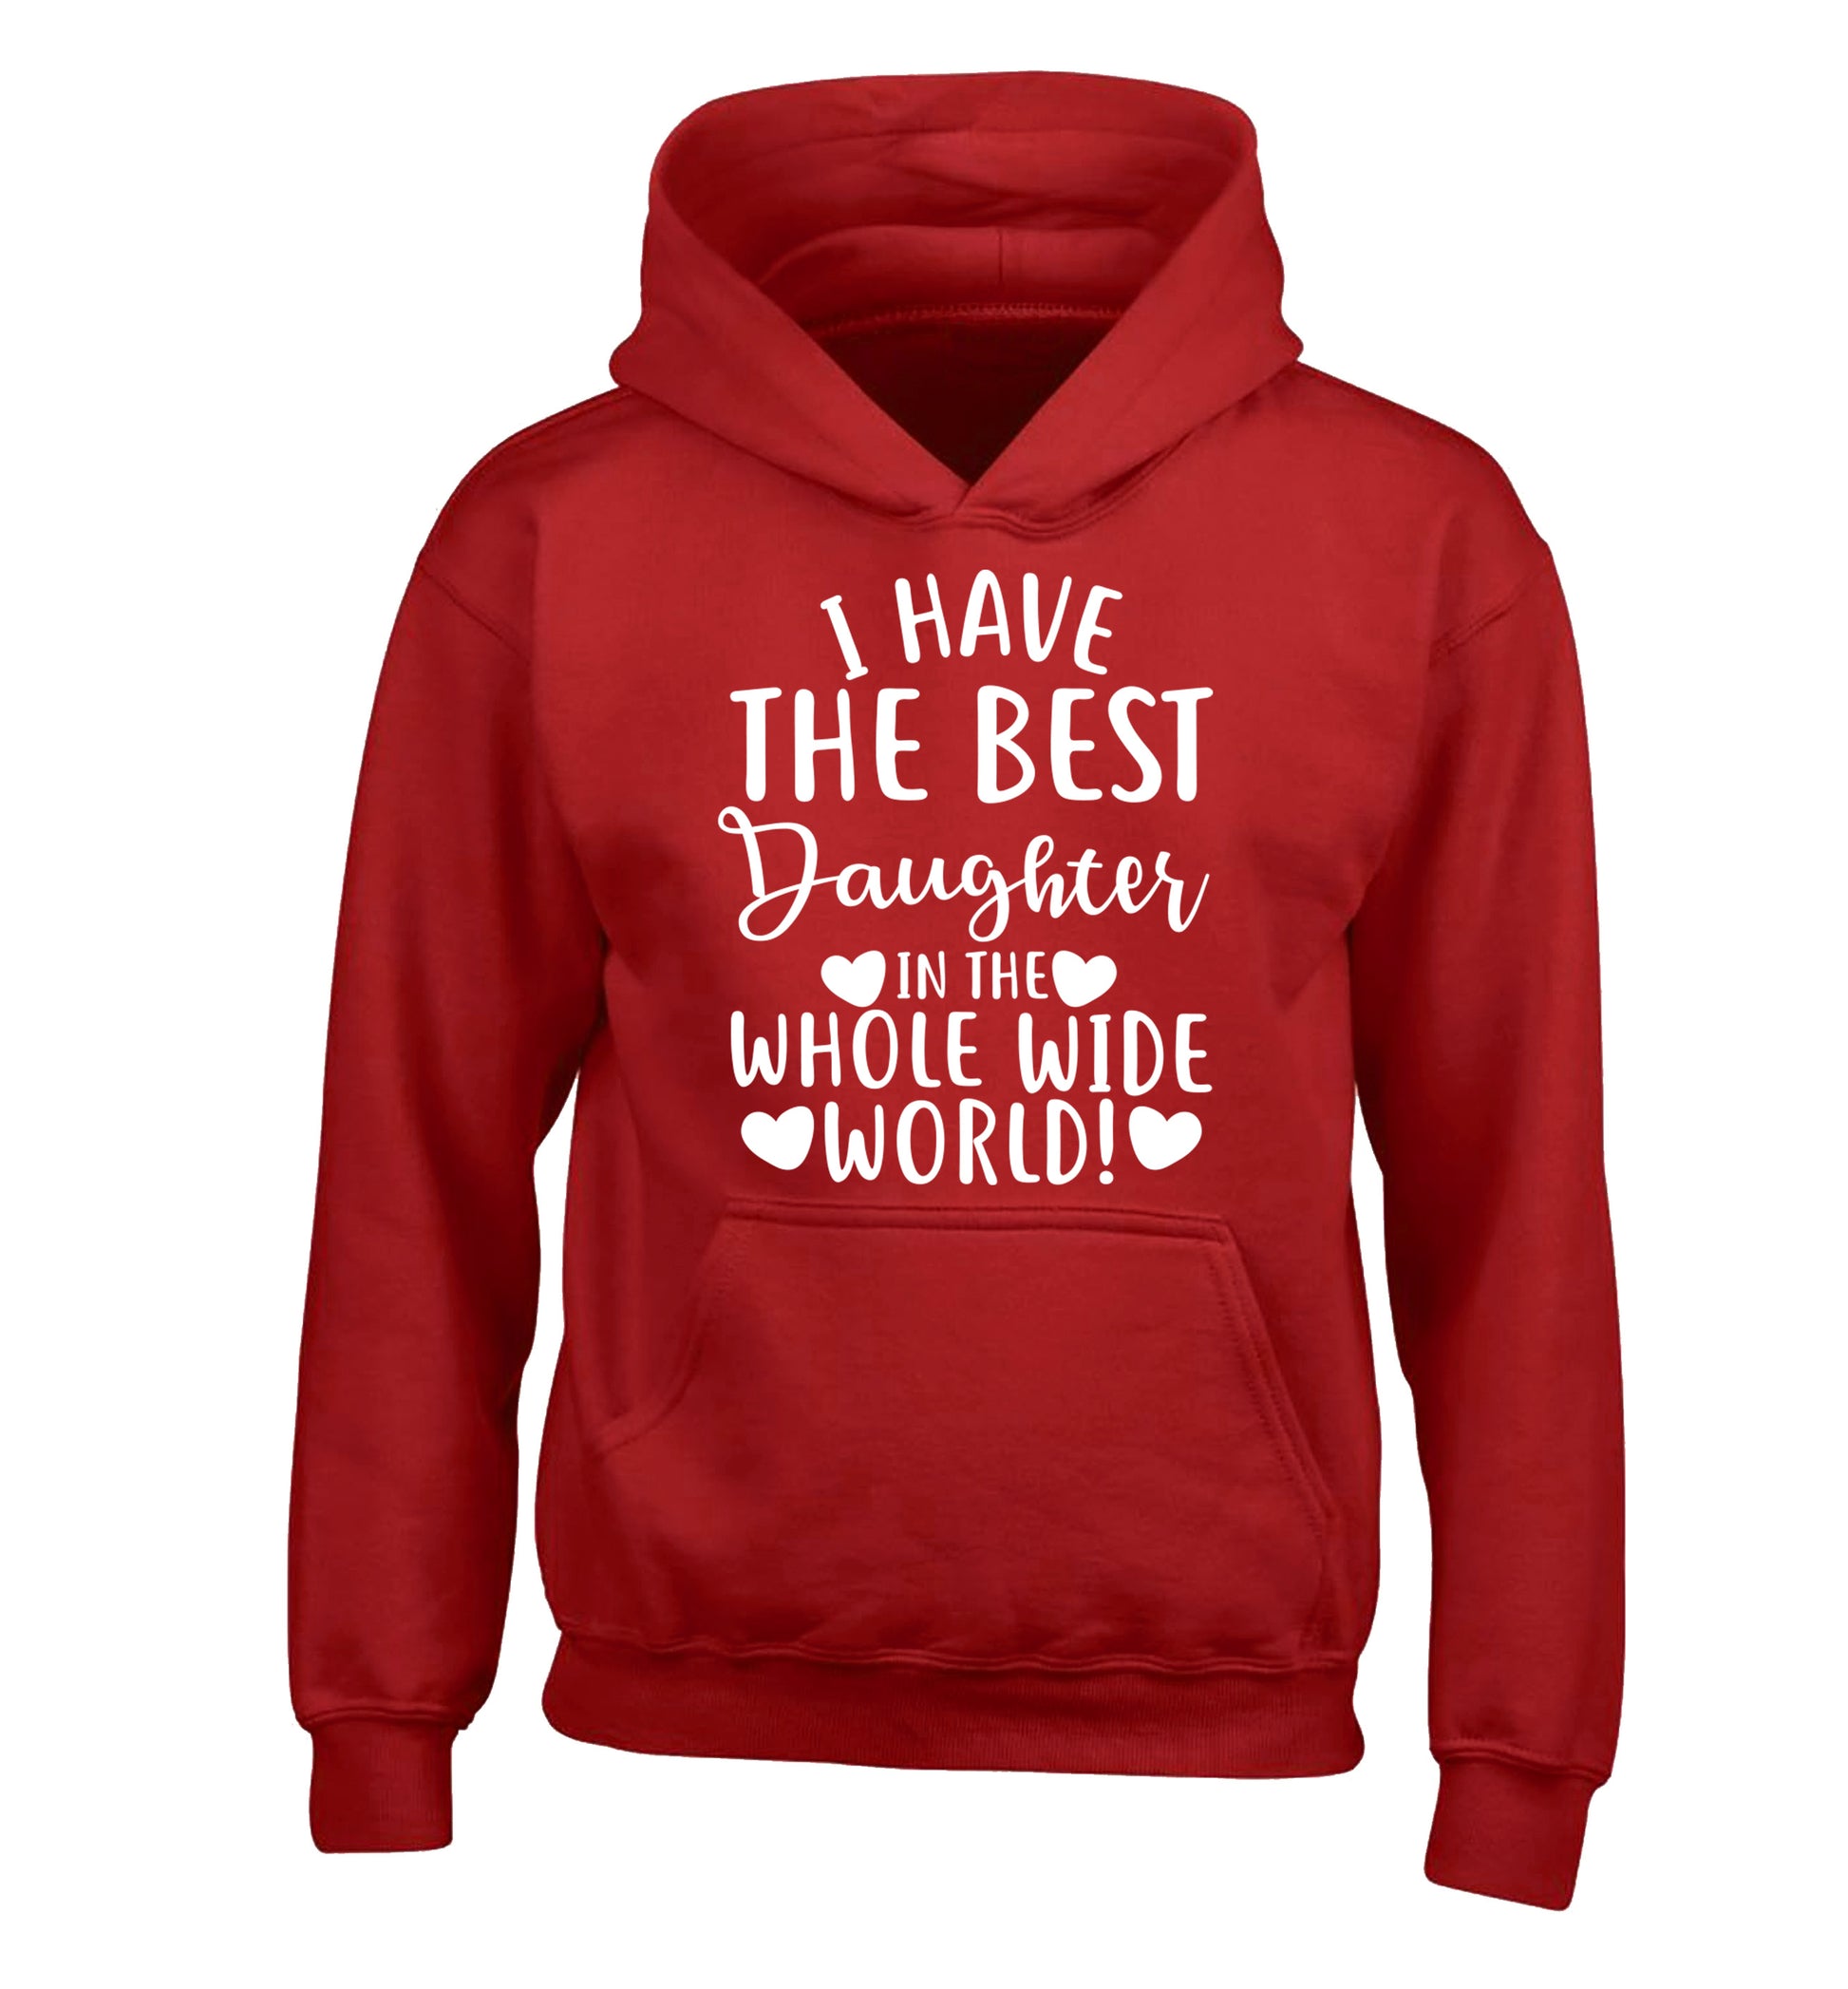 I have the best daughter in the whole wide world! children's red hoodie 12-13 Years